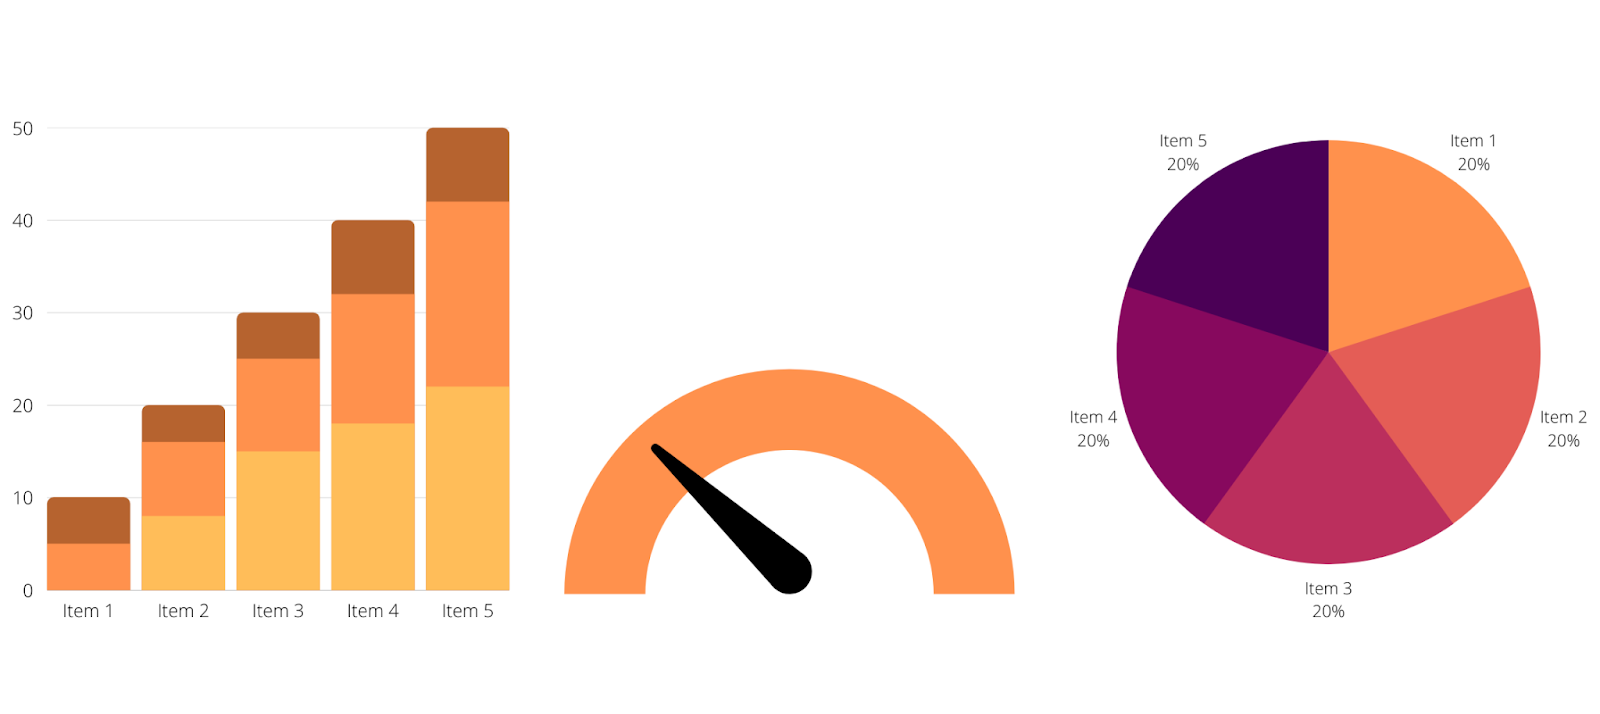 three visual examples of data visualization design. A bar graph, pie chart, and meter graphic are depicted in various hues of orange. Image created in Canva